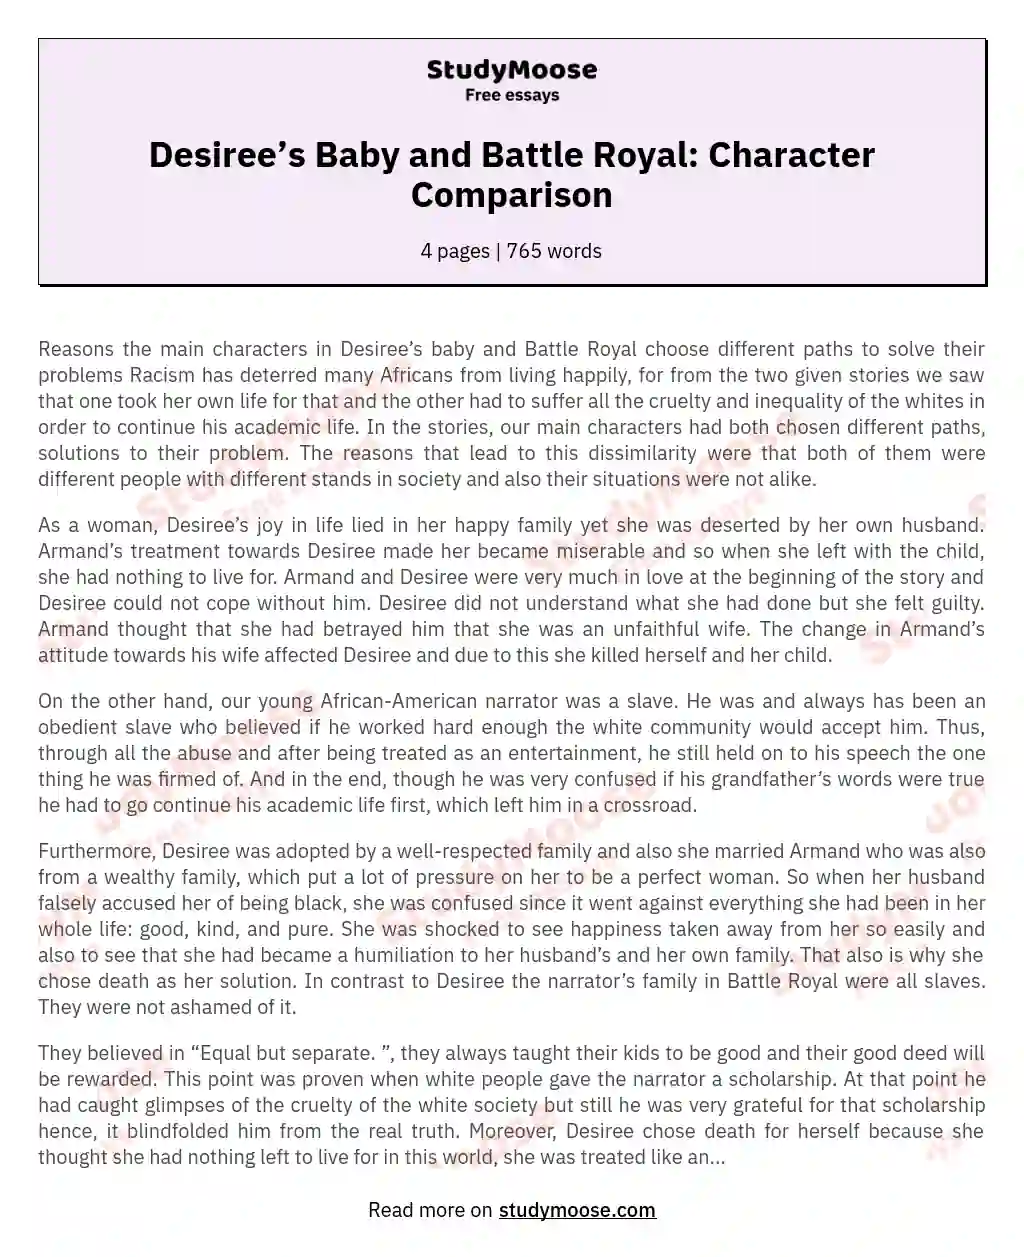 Desiree’s Baby and Battle Royal: Character Comparison